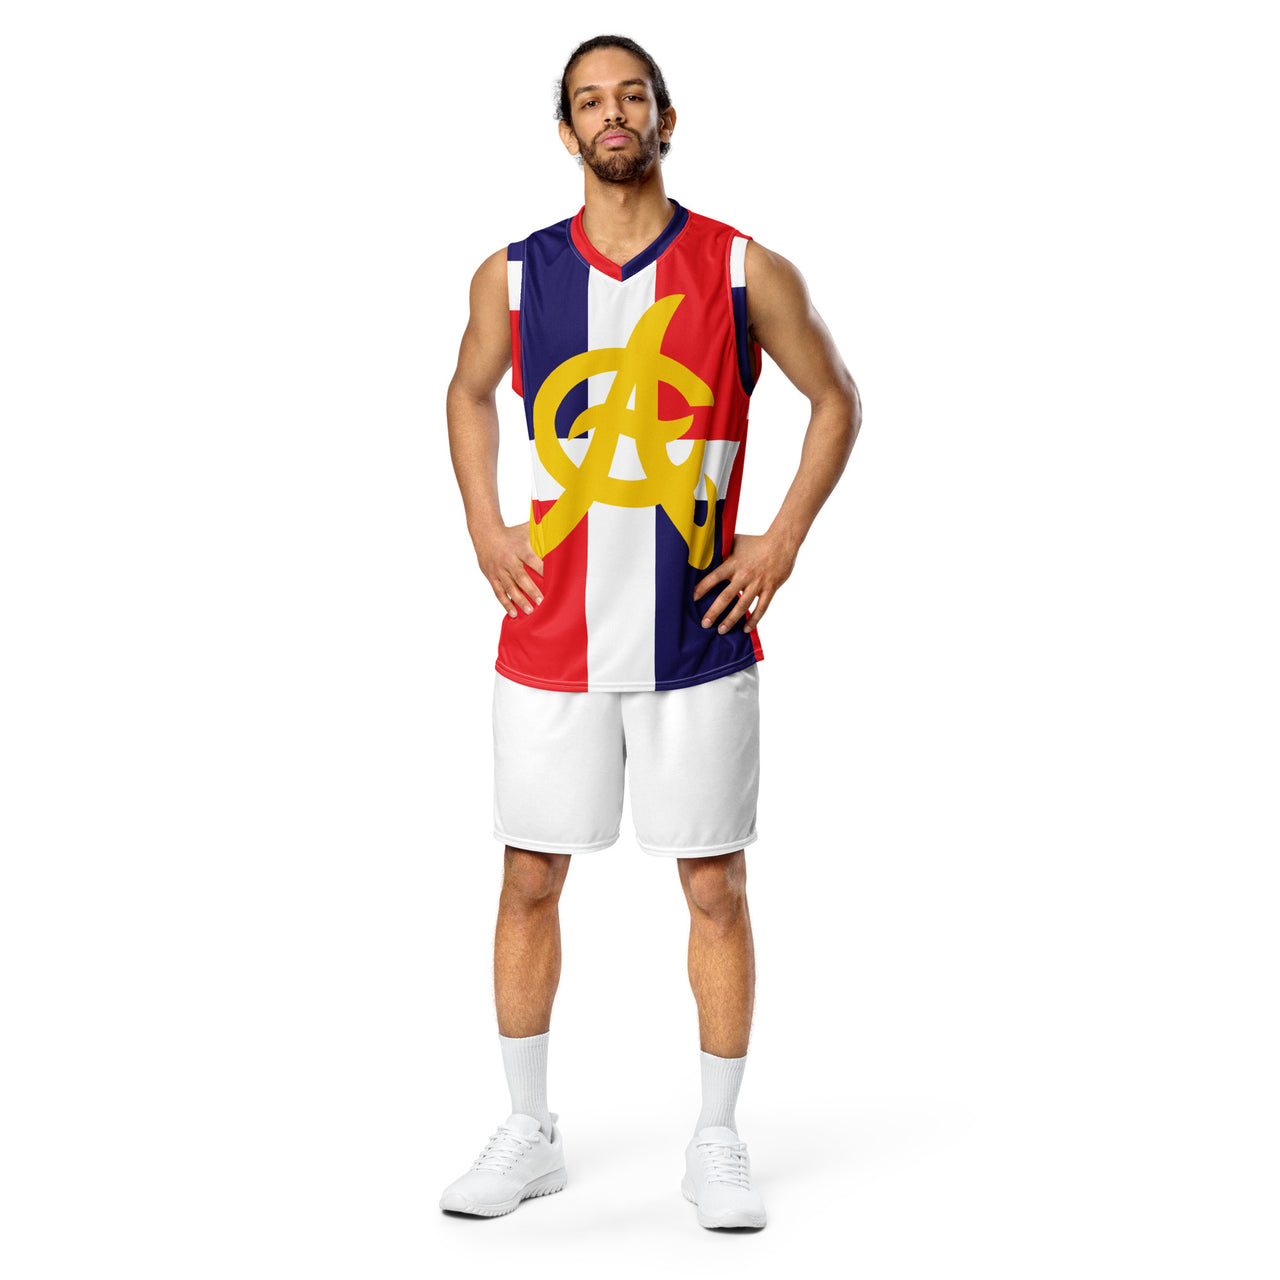 Aguilas basketball jersey